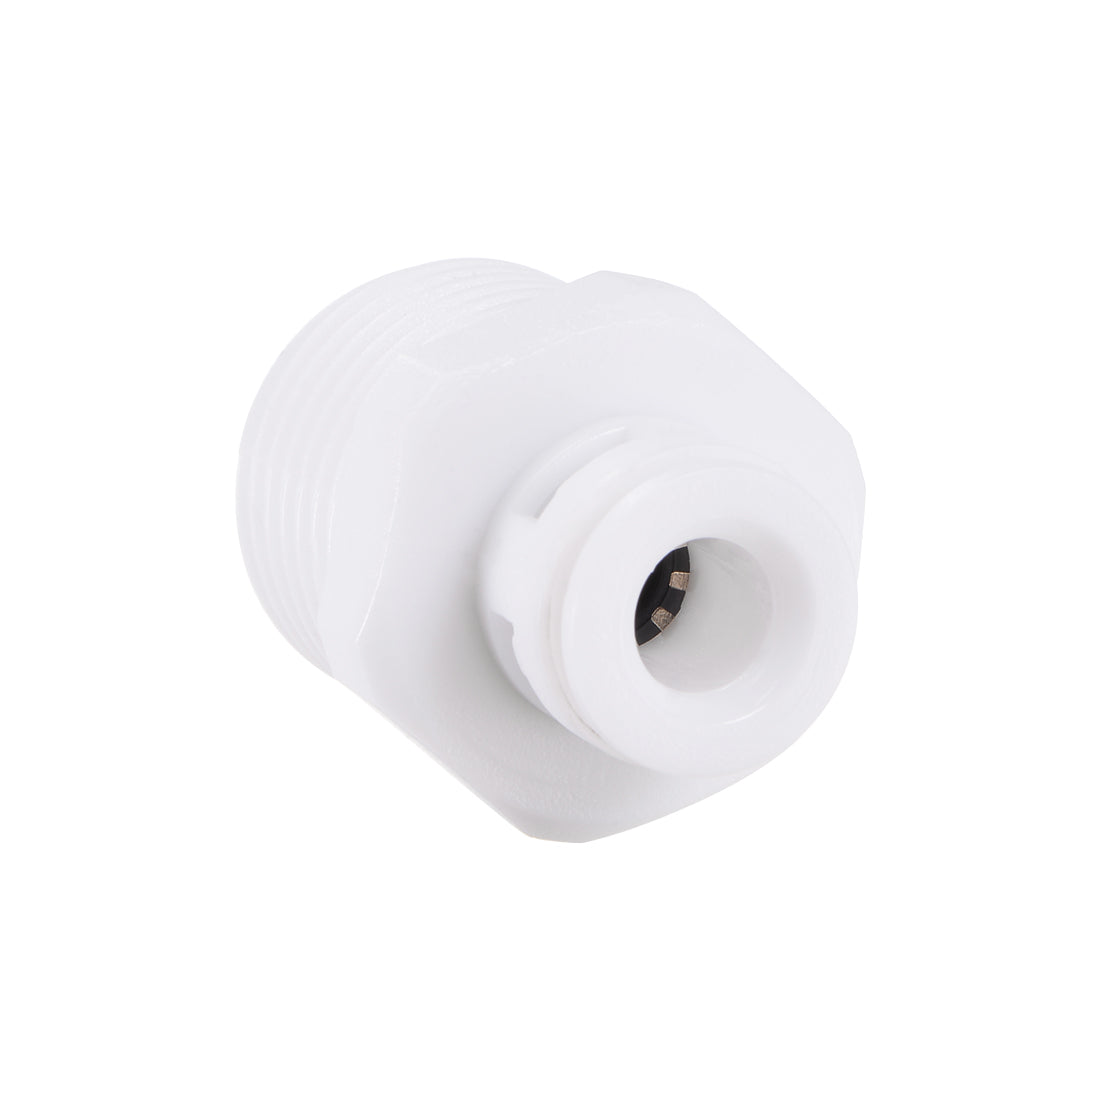 uxcell Uxcell Quick Straight Union Connector Fittings G1/2 Male Thread to 1/4" for Reverse Osmosis Water Filtration, 30mm White 10Pcs